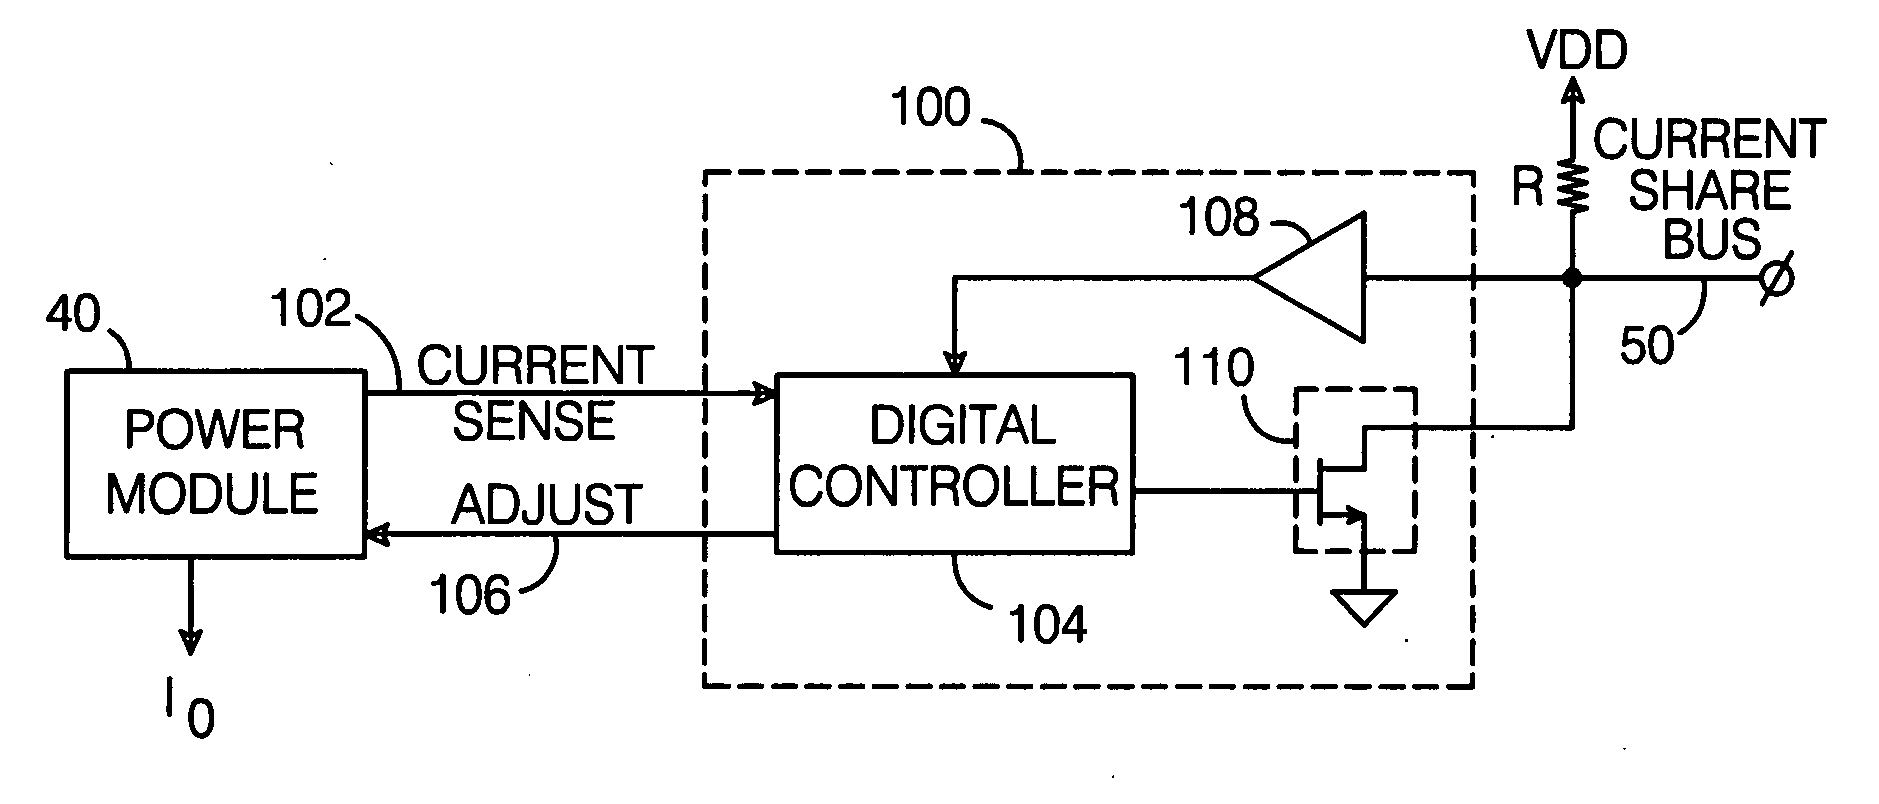 Digital current share bus interface